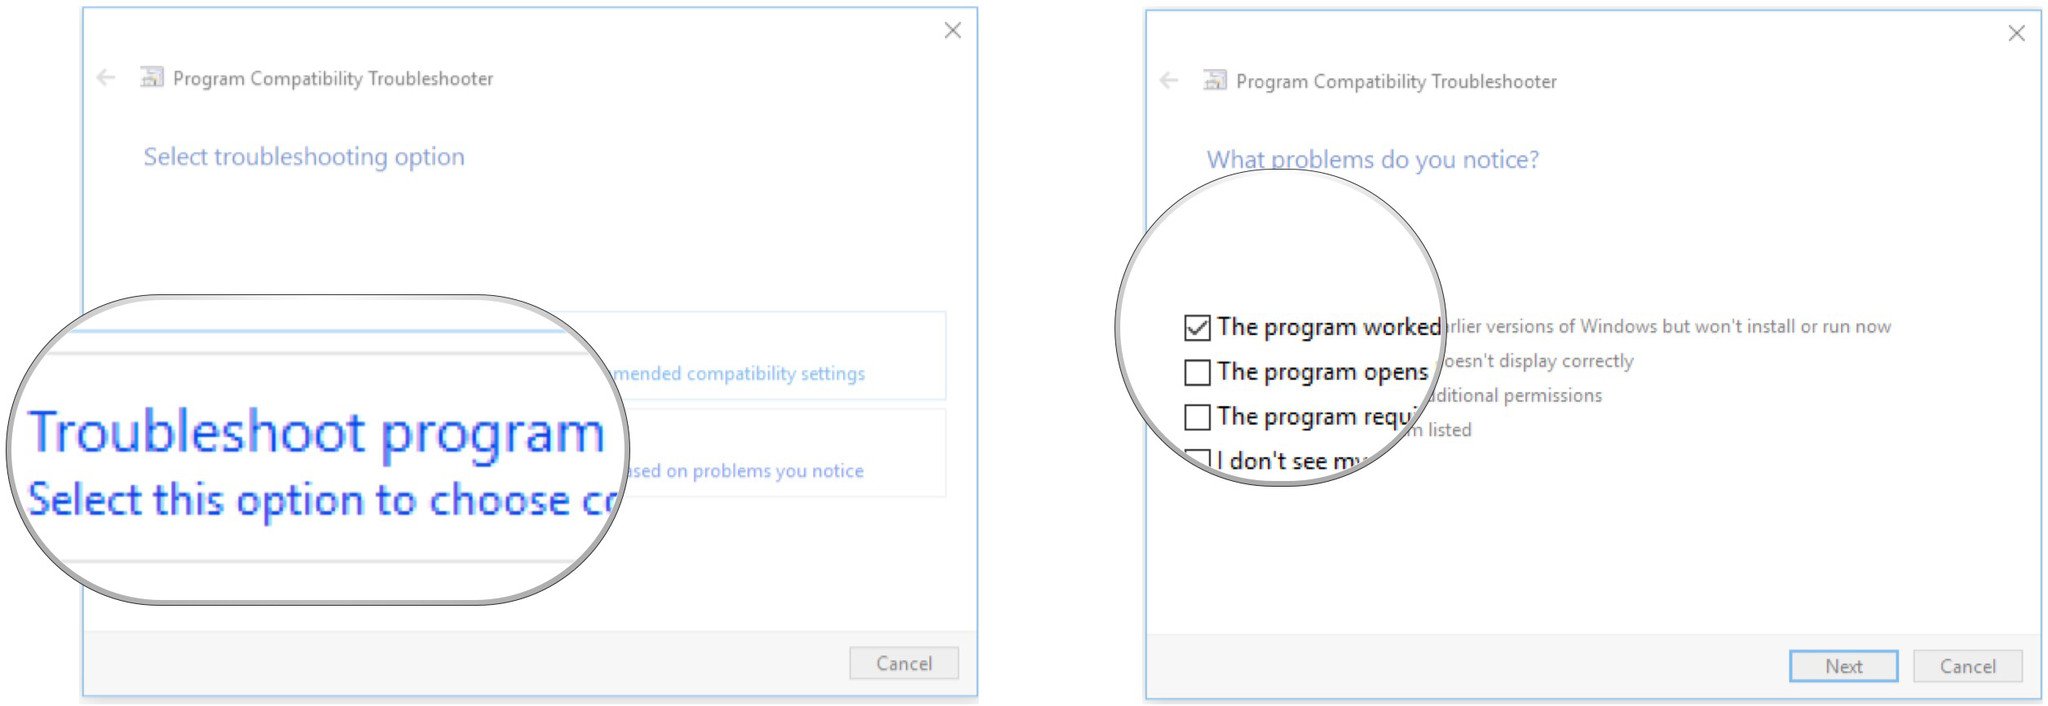 Click Troubleshoot Program. Check the box that says The program worked in earlier versions of Windows.